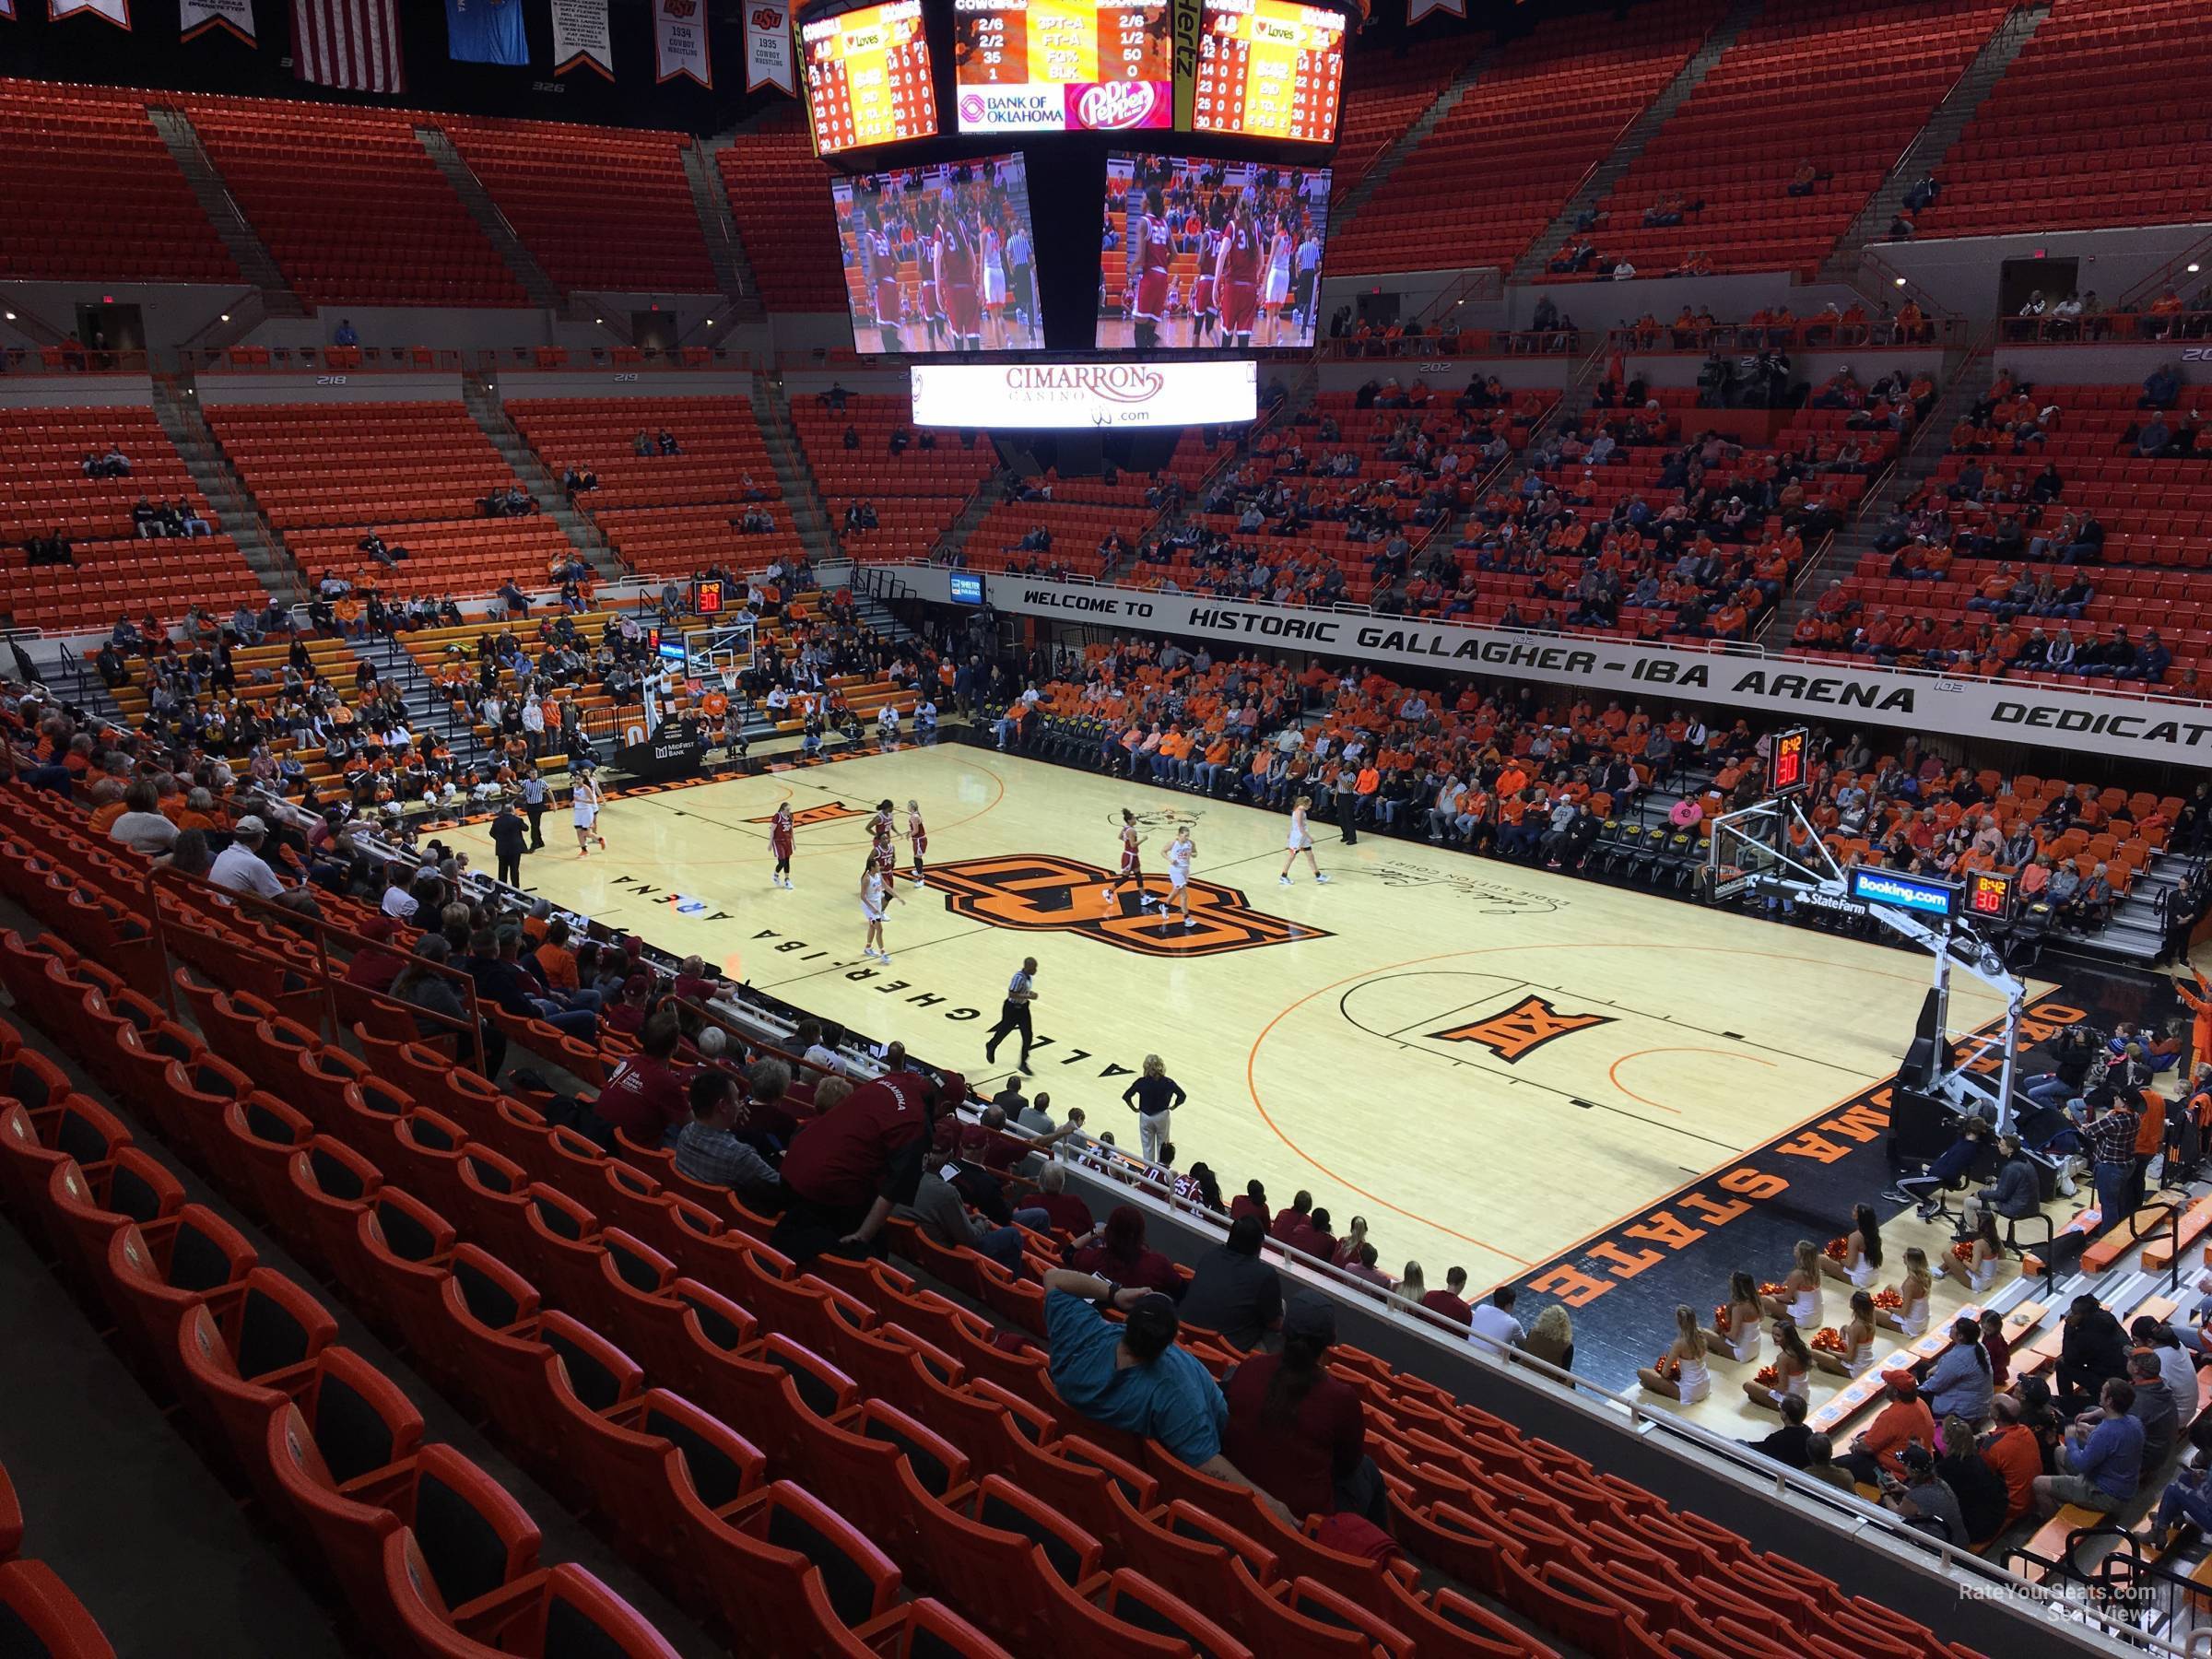 section 211, row 13 seat view  - gallagher-iba arena